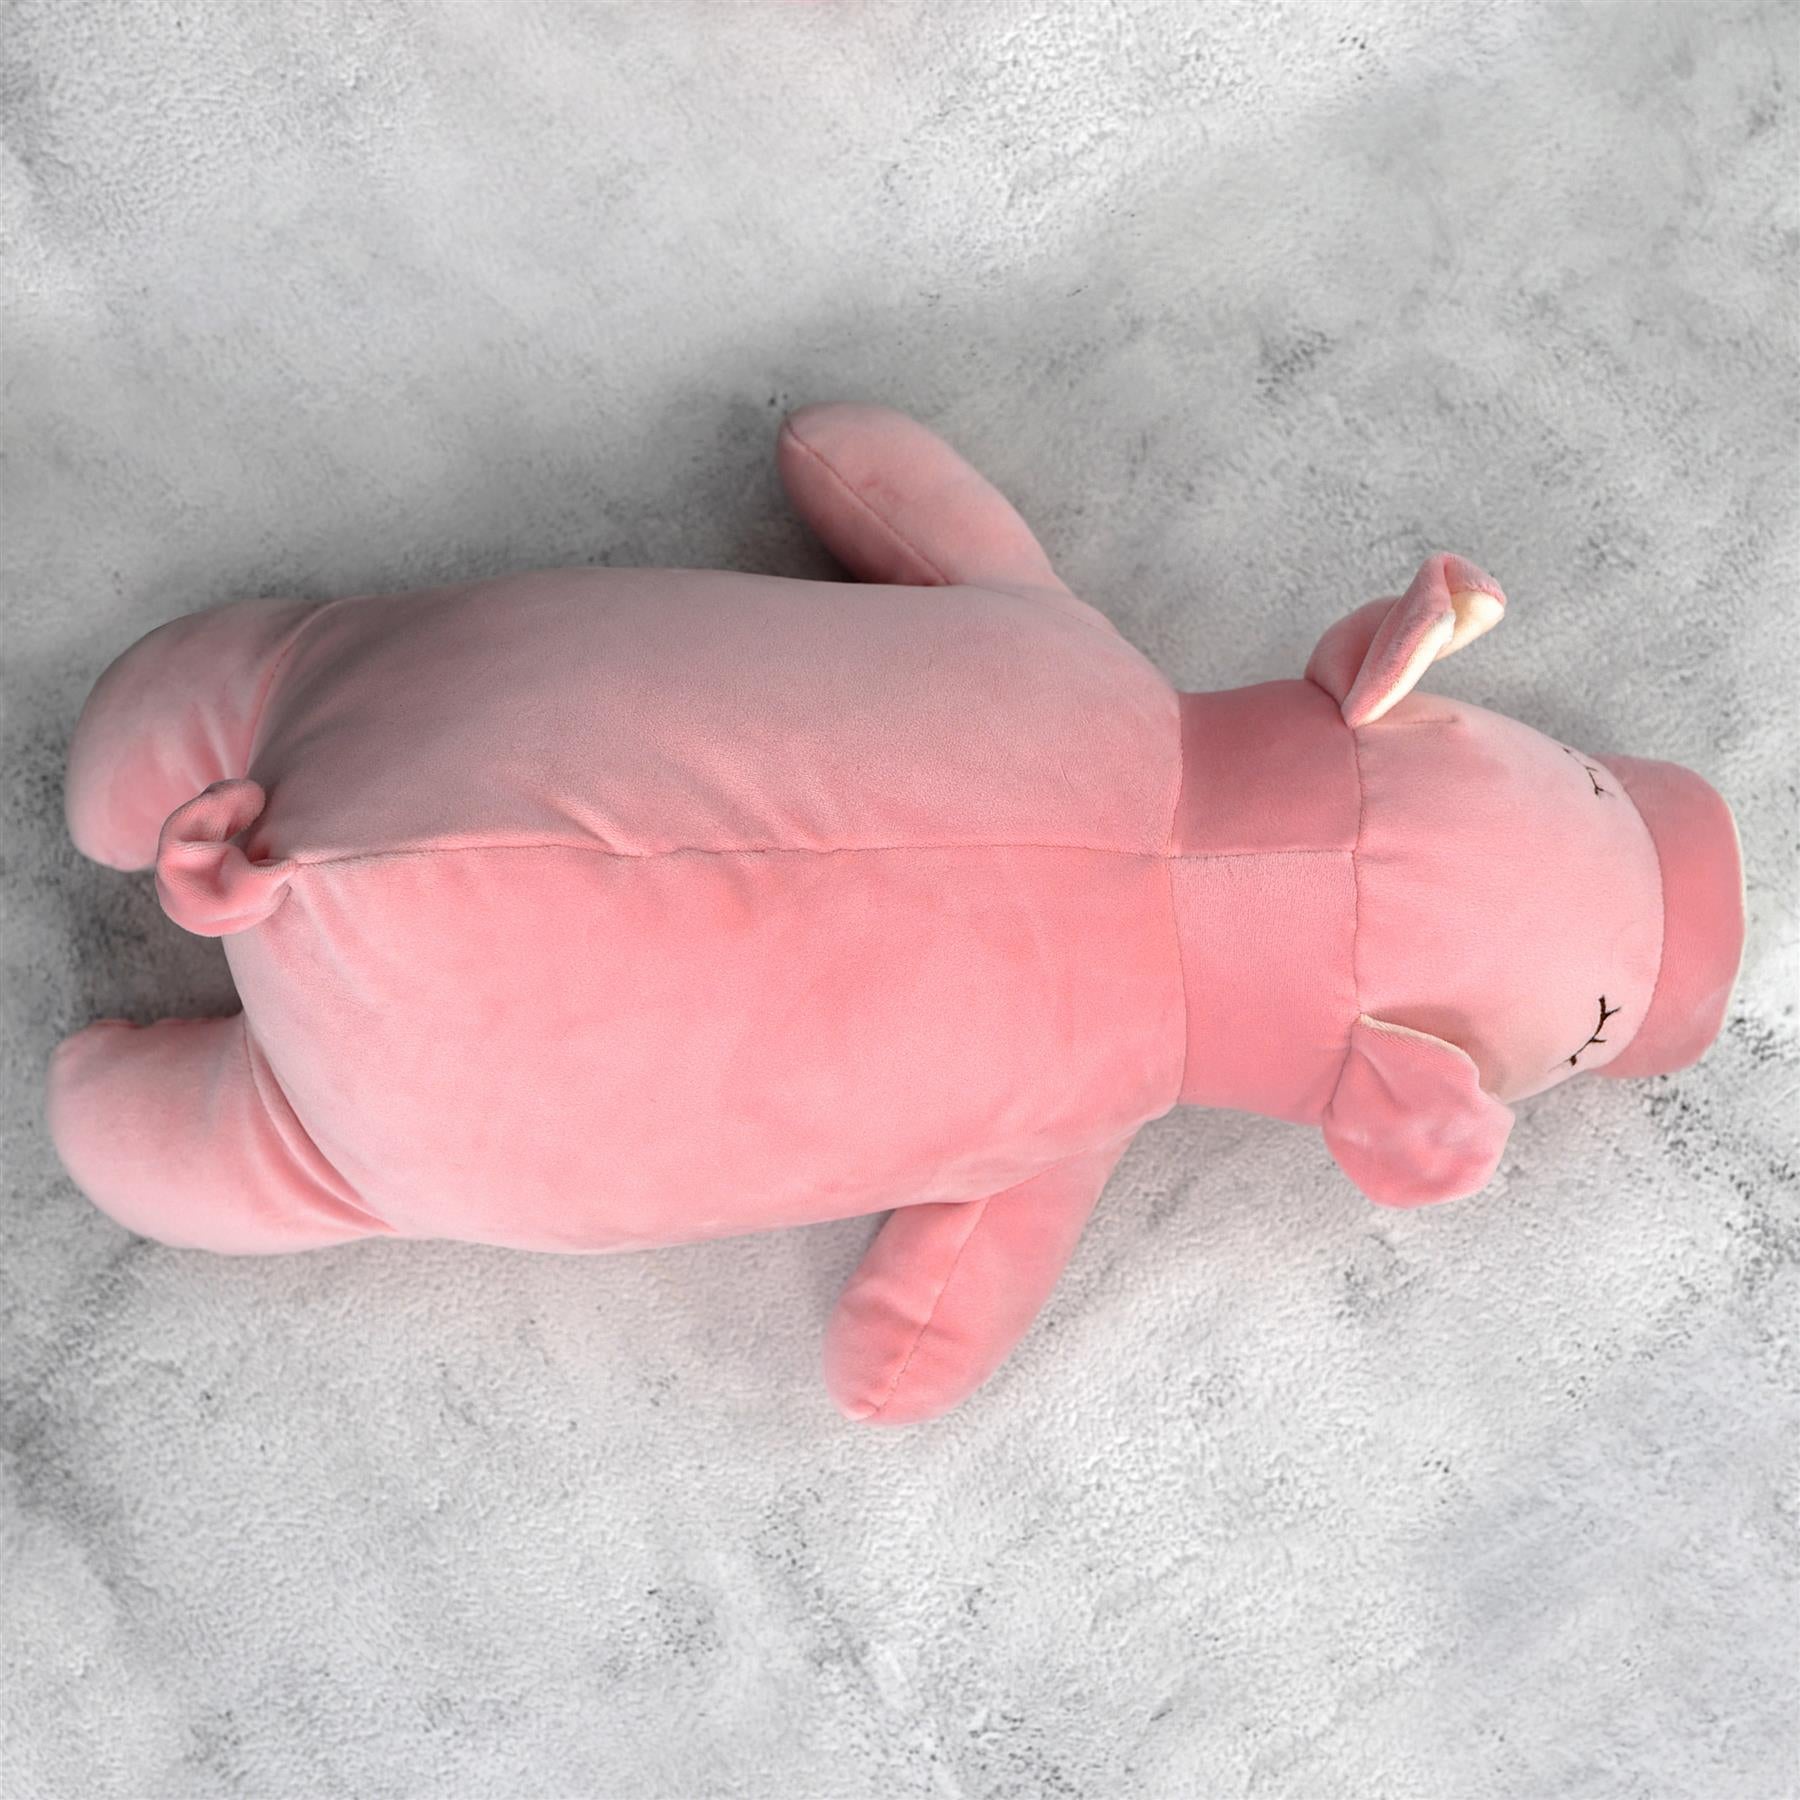 20” Super-Soft Pig Plush Pillow Toy by The Magic Toy Shop - The Magic Toy Shop